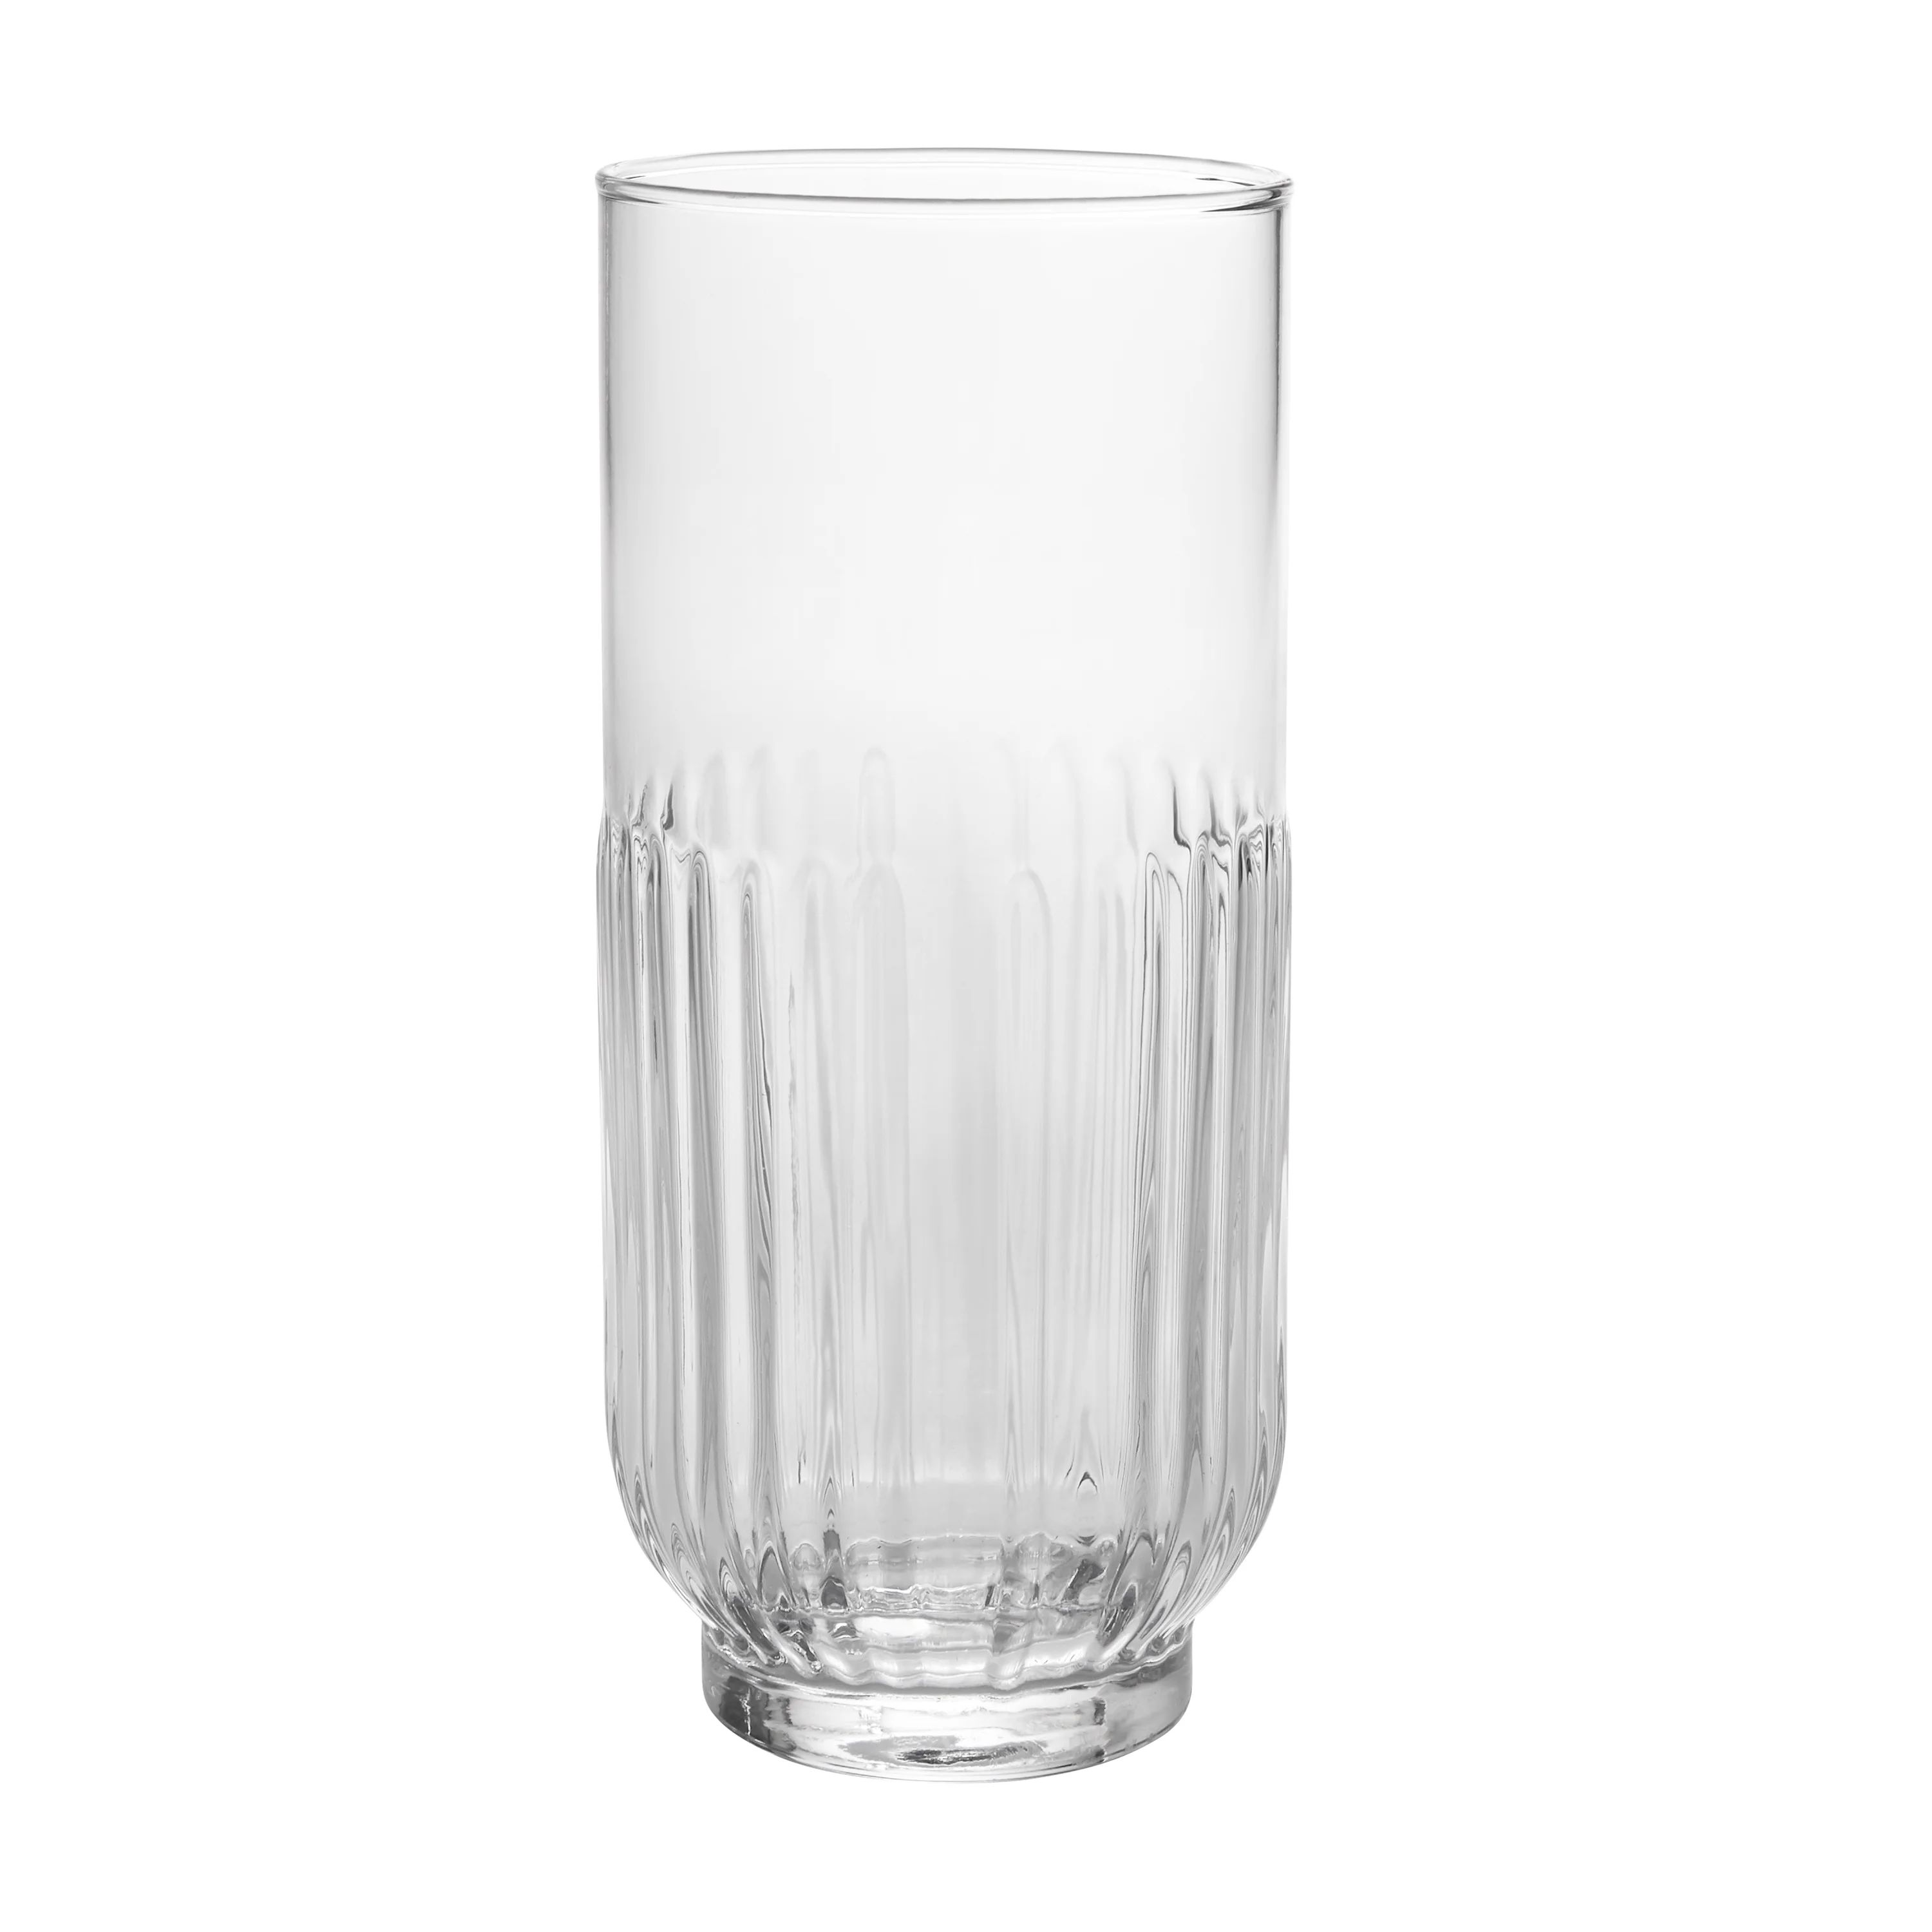 Better Homes & Gardens 4-Piece Clear Highball Glassware Set by Dave & Jenny Marrs | Walmart (US)